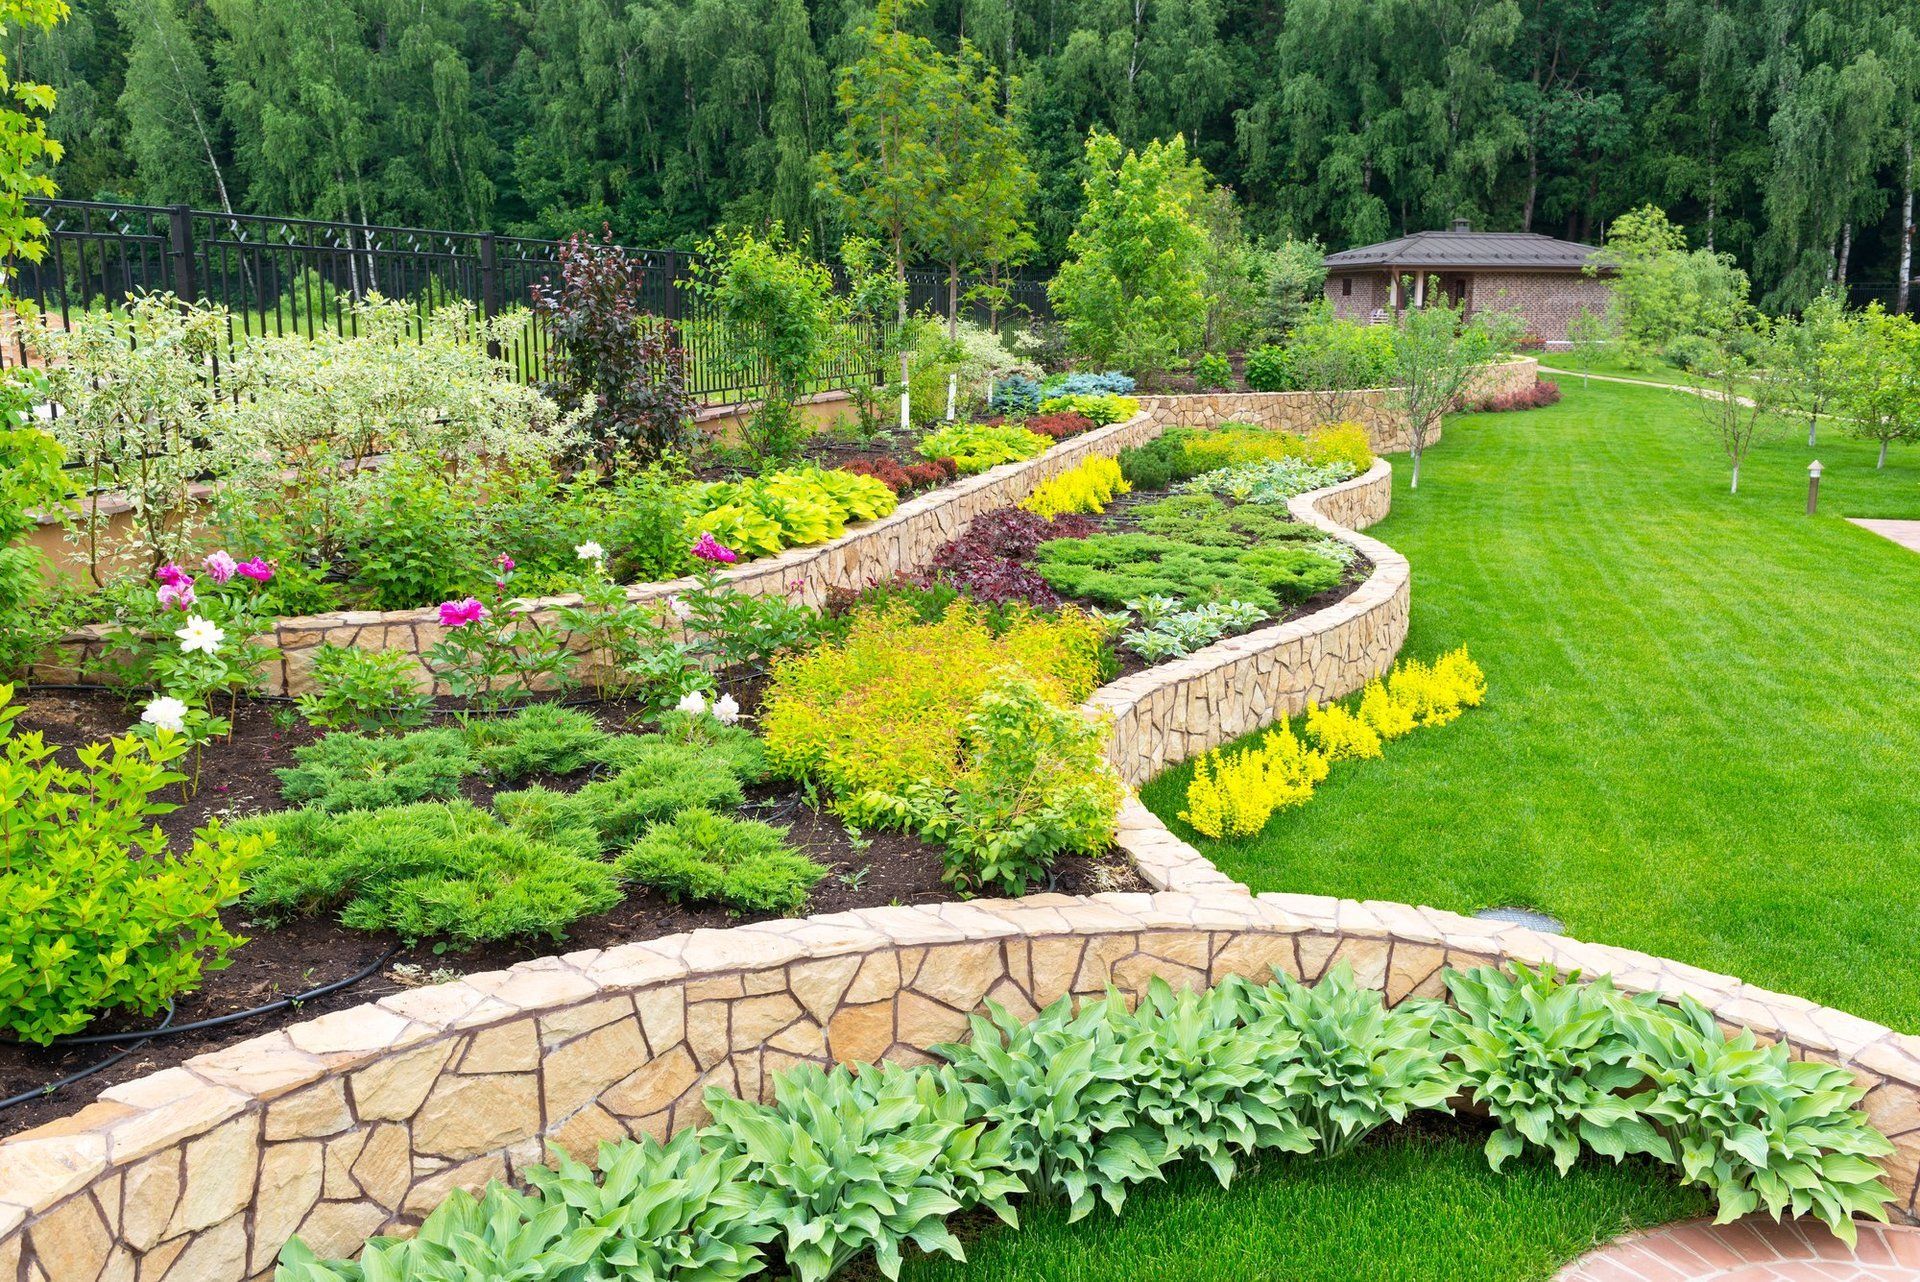 Lawn Care in Harmony, MN